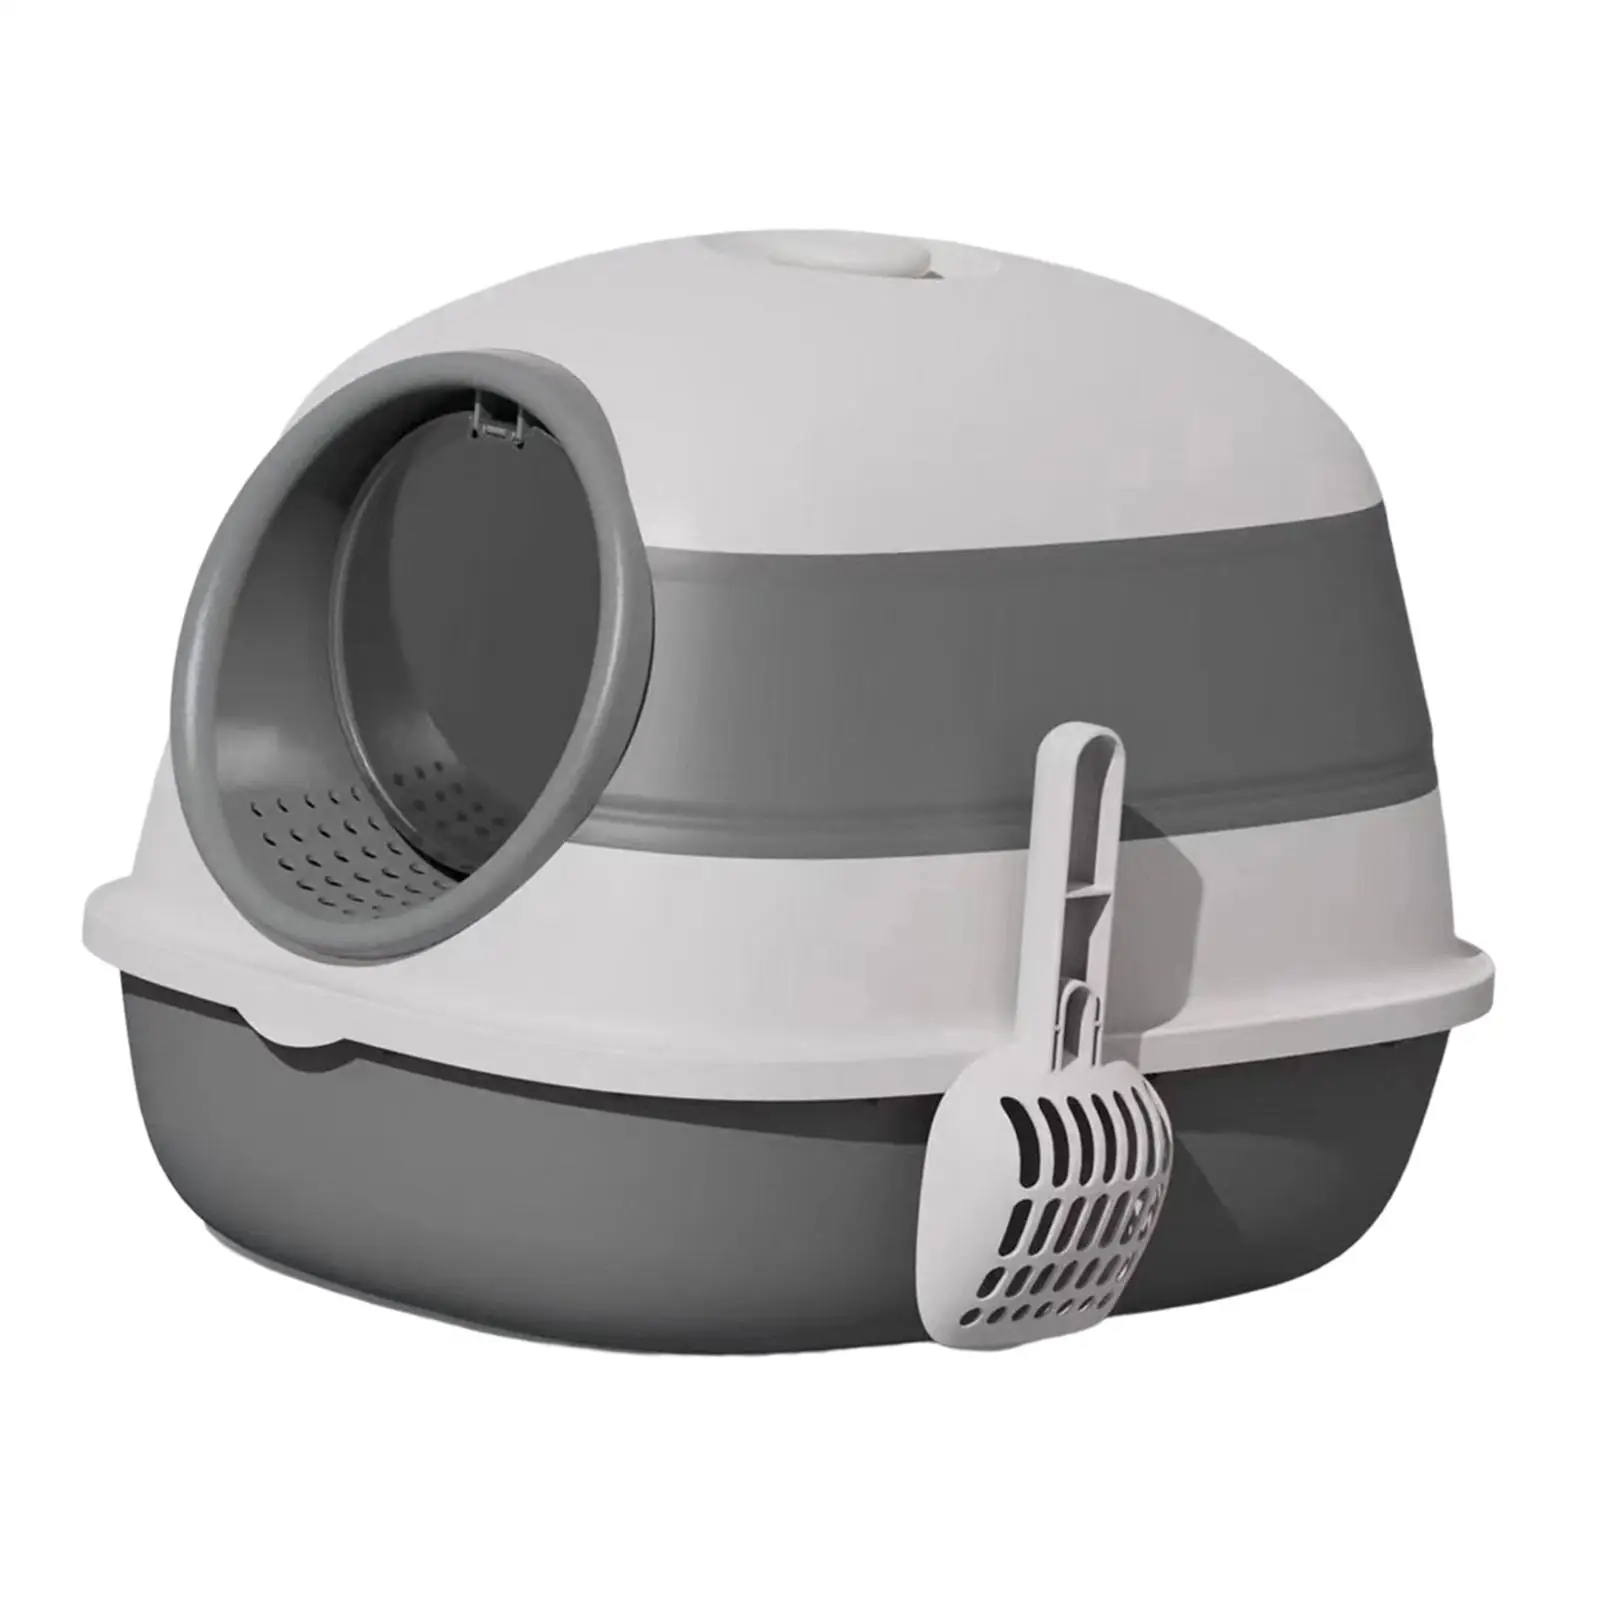 Folding Cat Litter Box Large Space Enclosed W/ Scoop Hidden Easy Clean Kitty House Portable Hooded Sand Box Basin Toilet